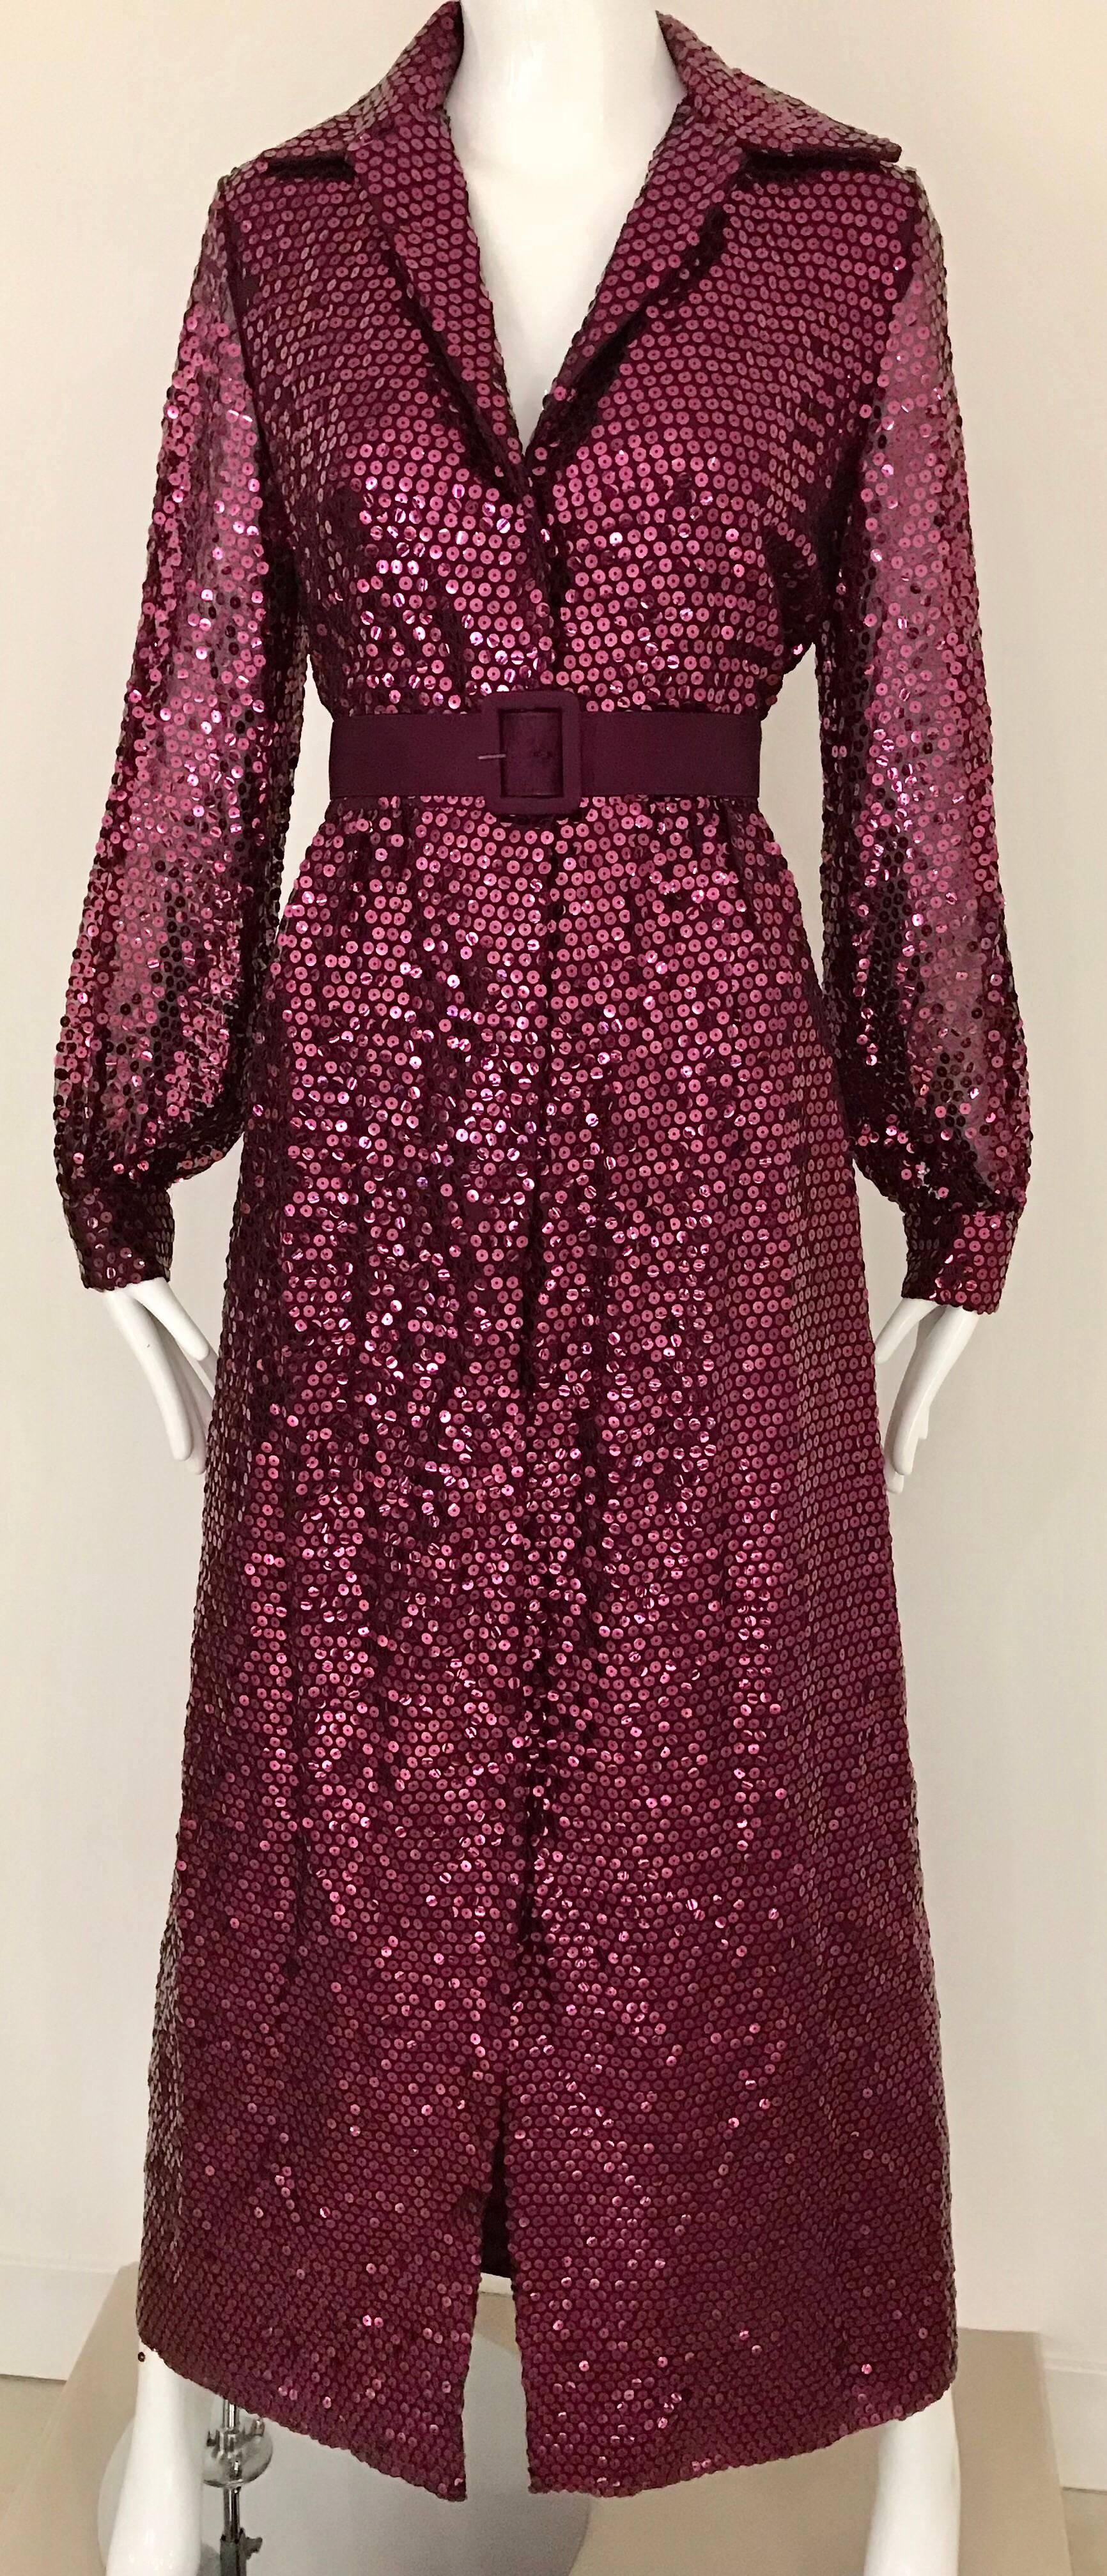 This  Vintage Oscar de LaRenta sequined maxi shirt dress wears “two" hats.
If you button it to the top it gives a more conservative look, or unbutton it a bit and create a provocative “plunging”  look.  Either way you have classic “Oscar” good